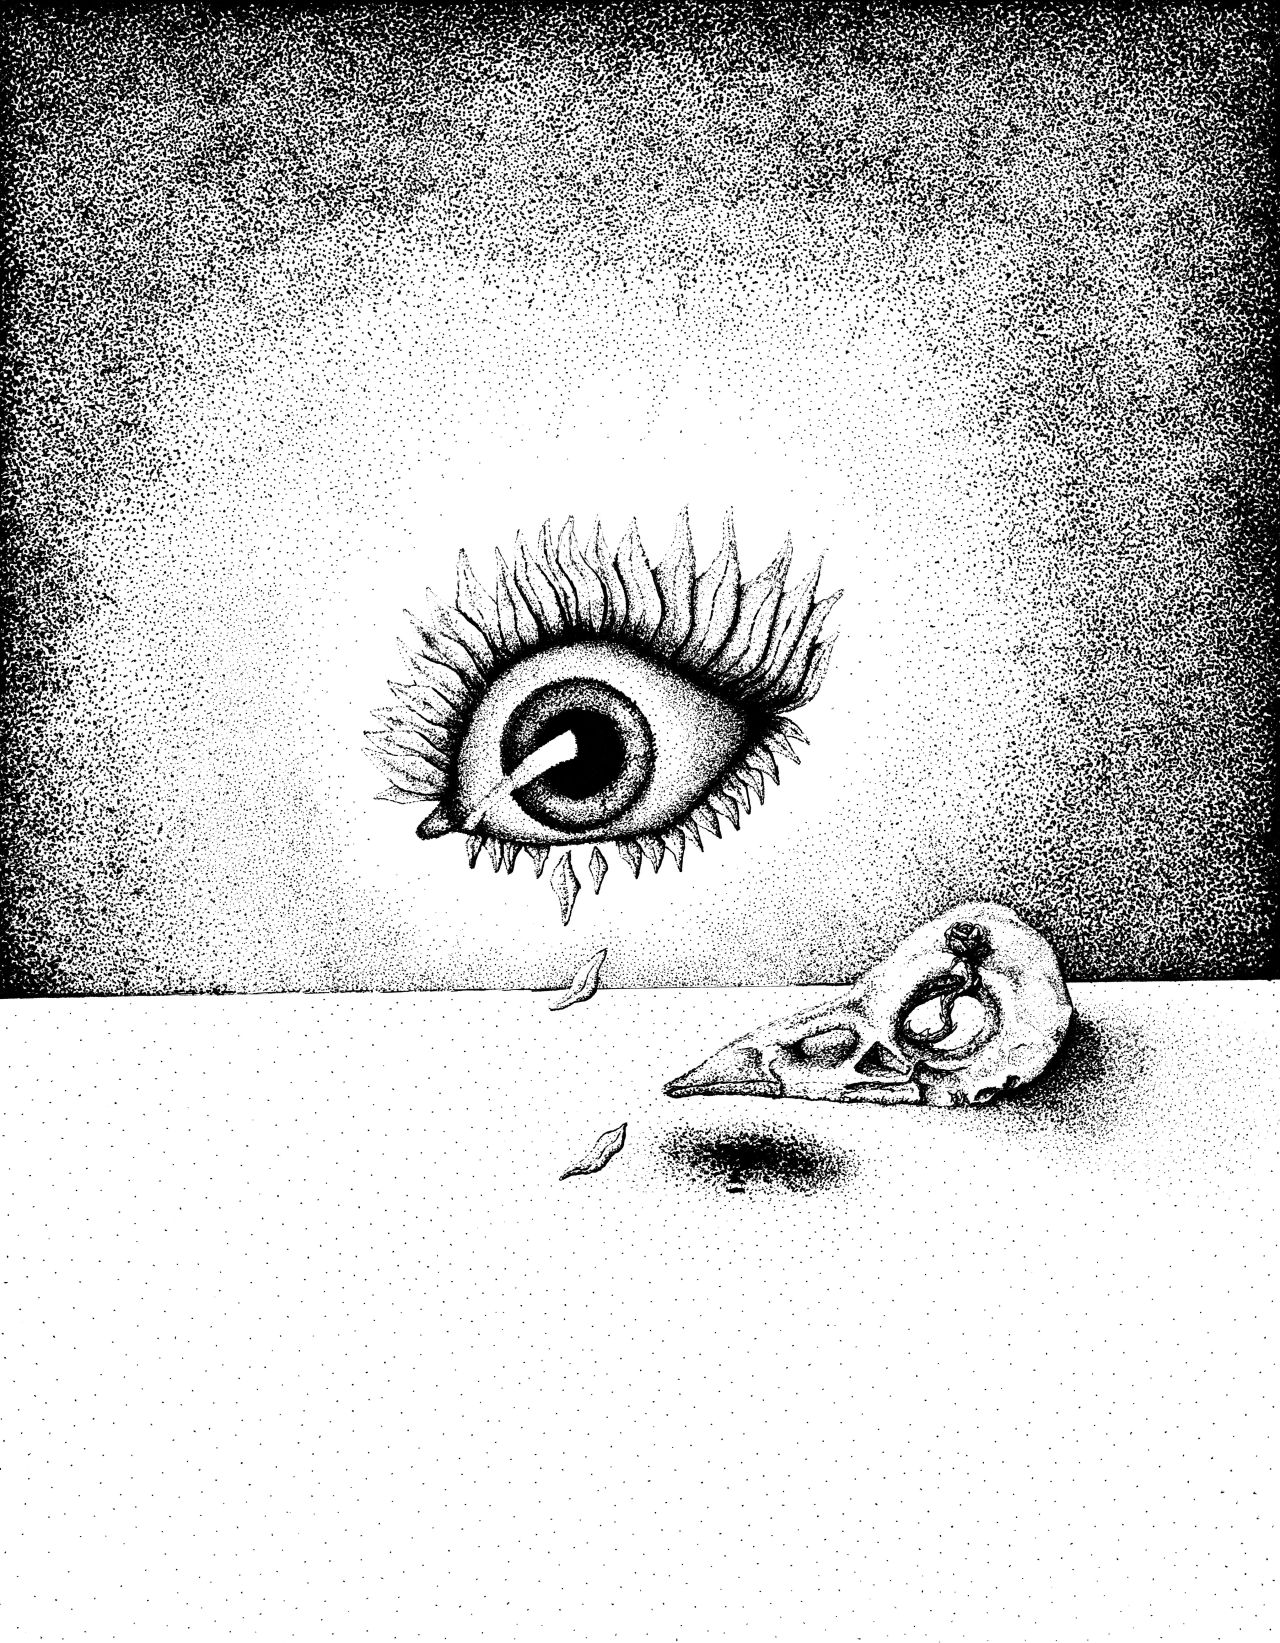 'The Eye in Bloom'Dotwork piece inspired by Salvador Dalí&#8217;s painting &#8216;The Eye&#8217;